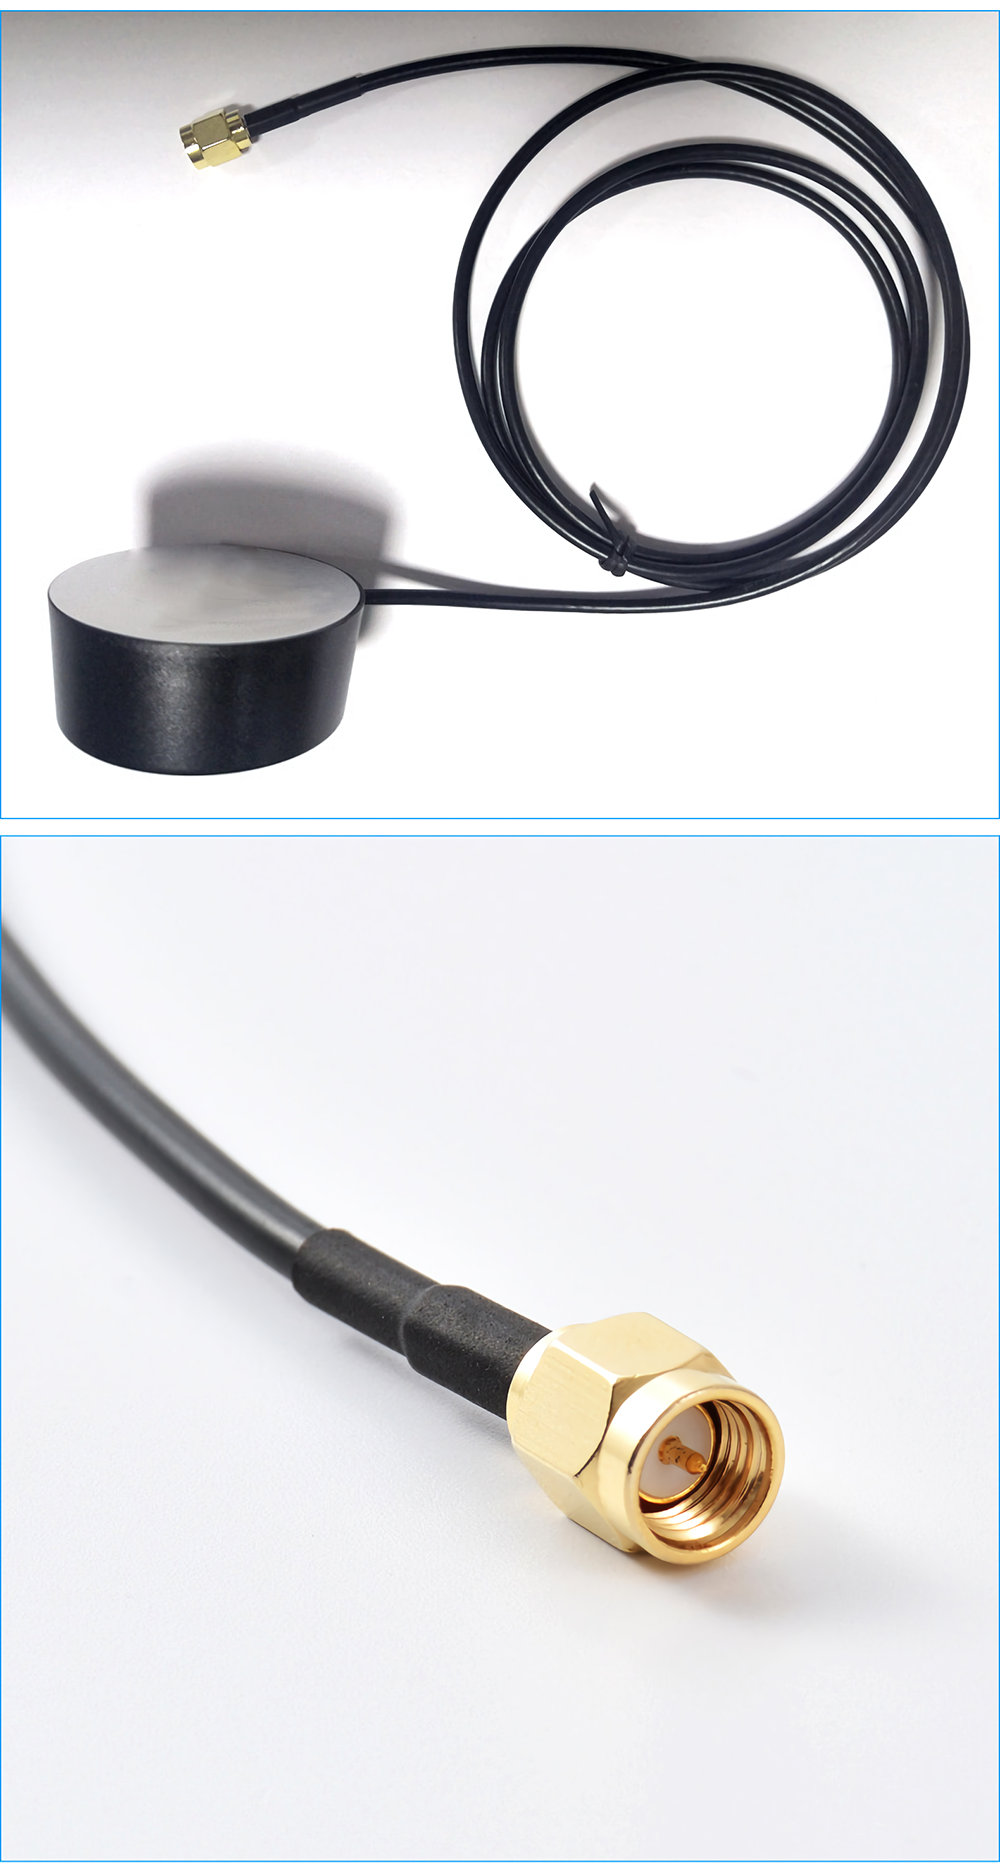 Myantenna-Magnetic-4G-LTE-Cabinet-Antenna-2dbi-Waterproof-with-0612m-Extension-Cable-SMA-Male-Connec-1887477-5